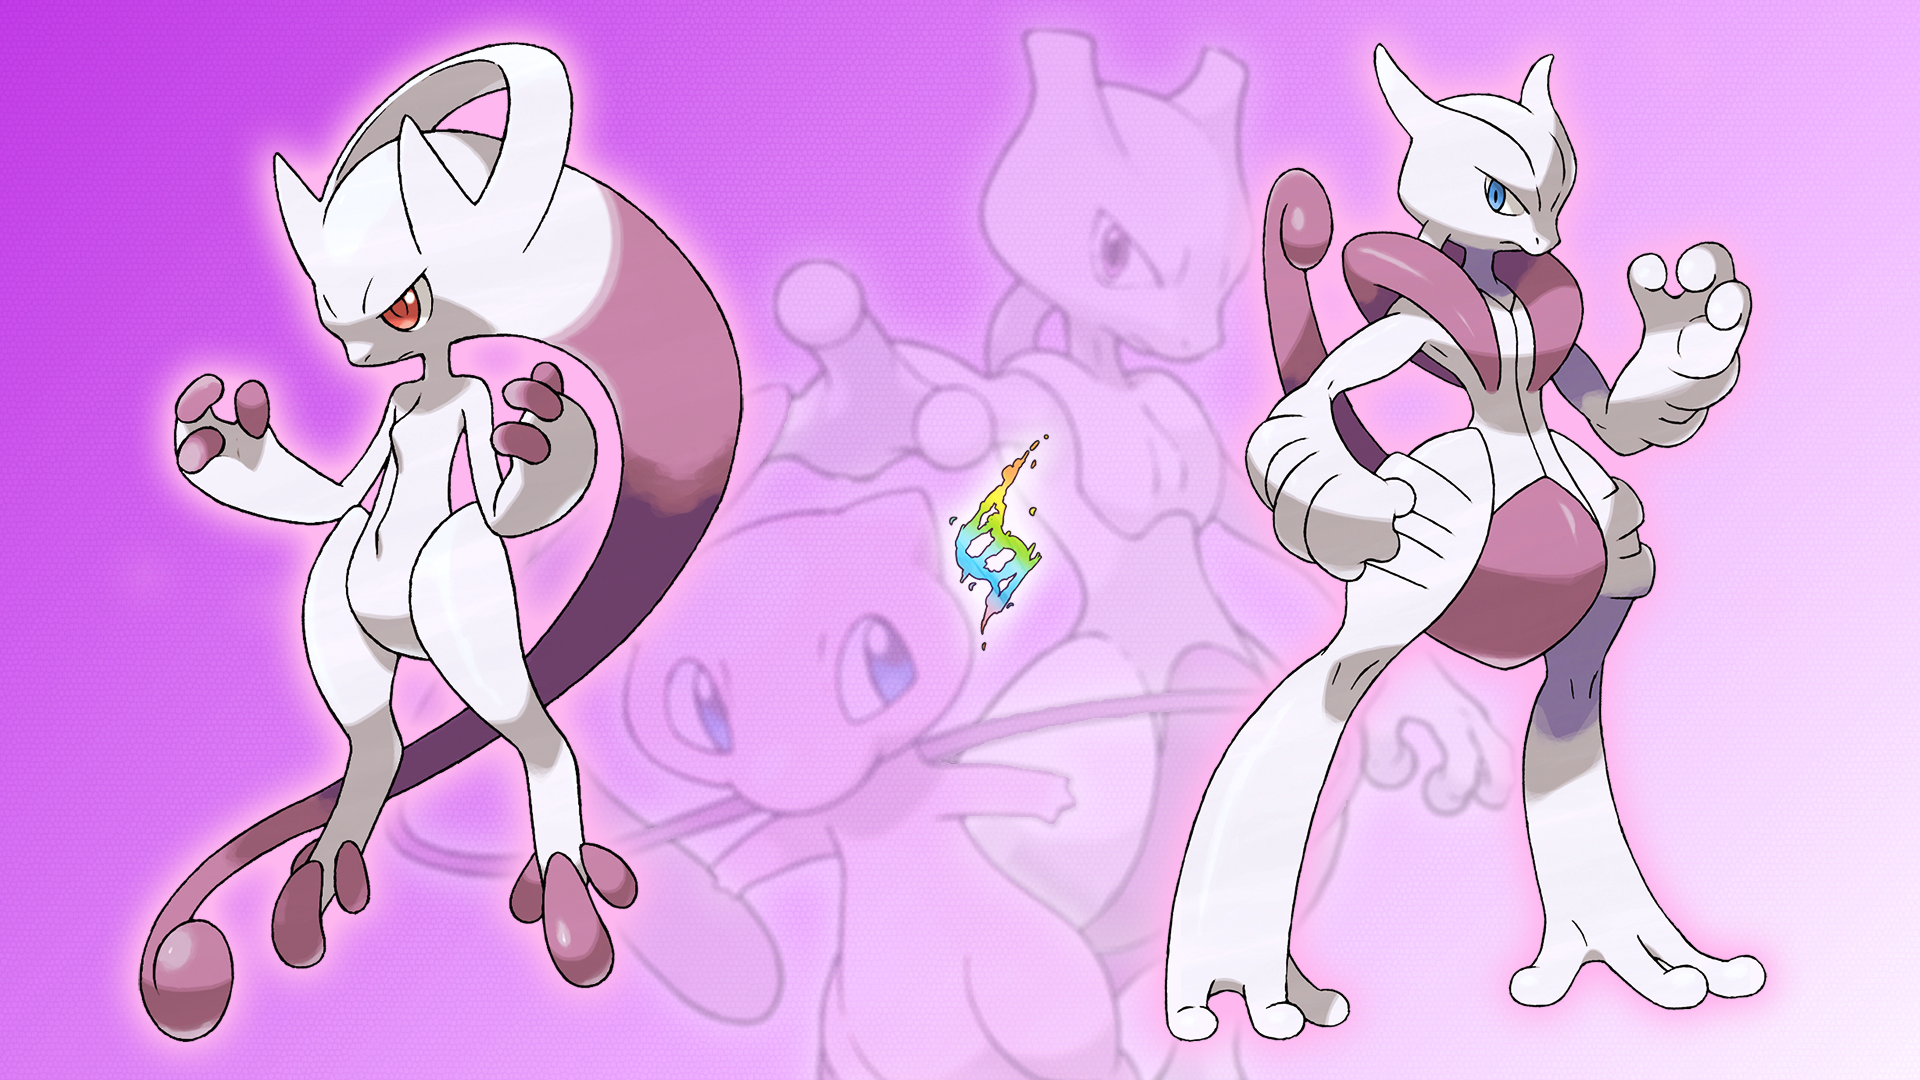 Pokemon Mew And Mewtwo Wallpaper Images Pictures   Becuo